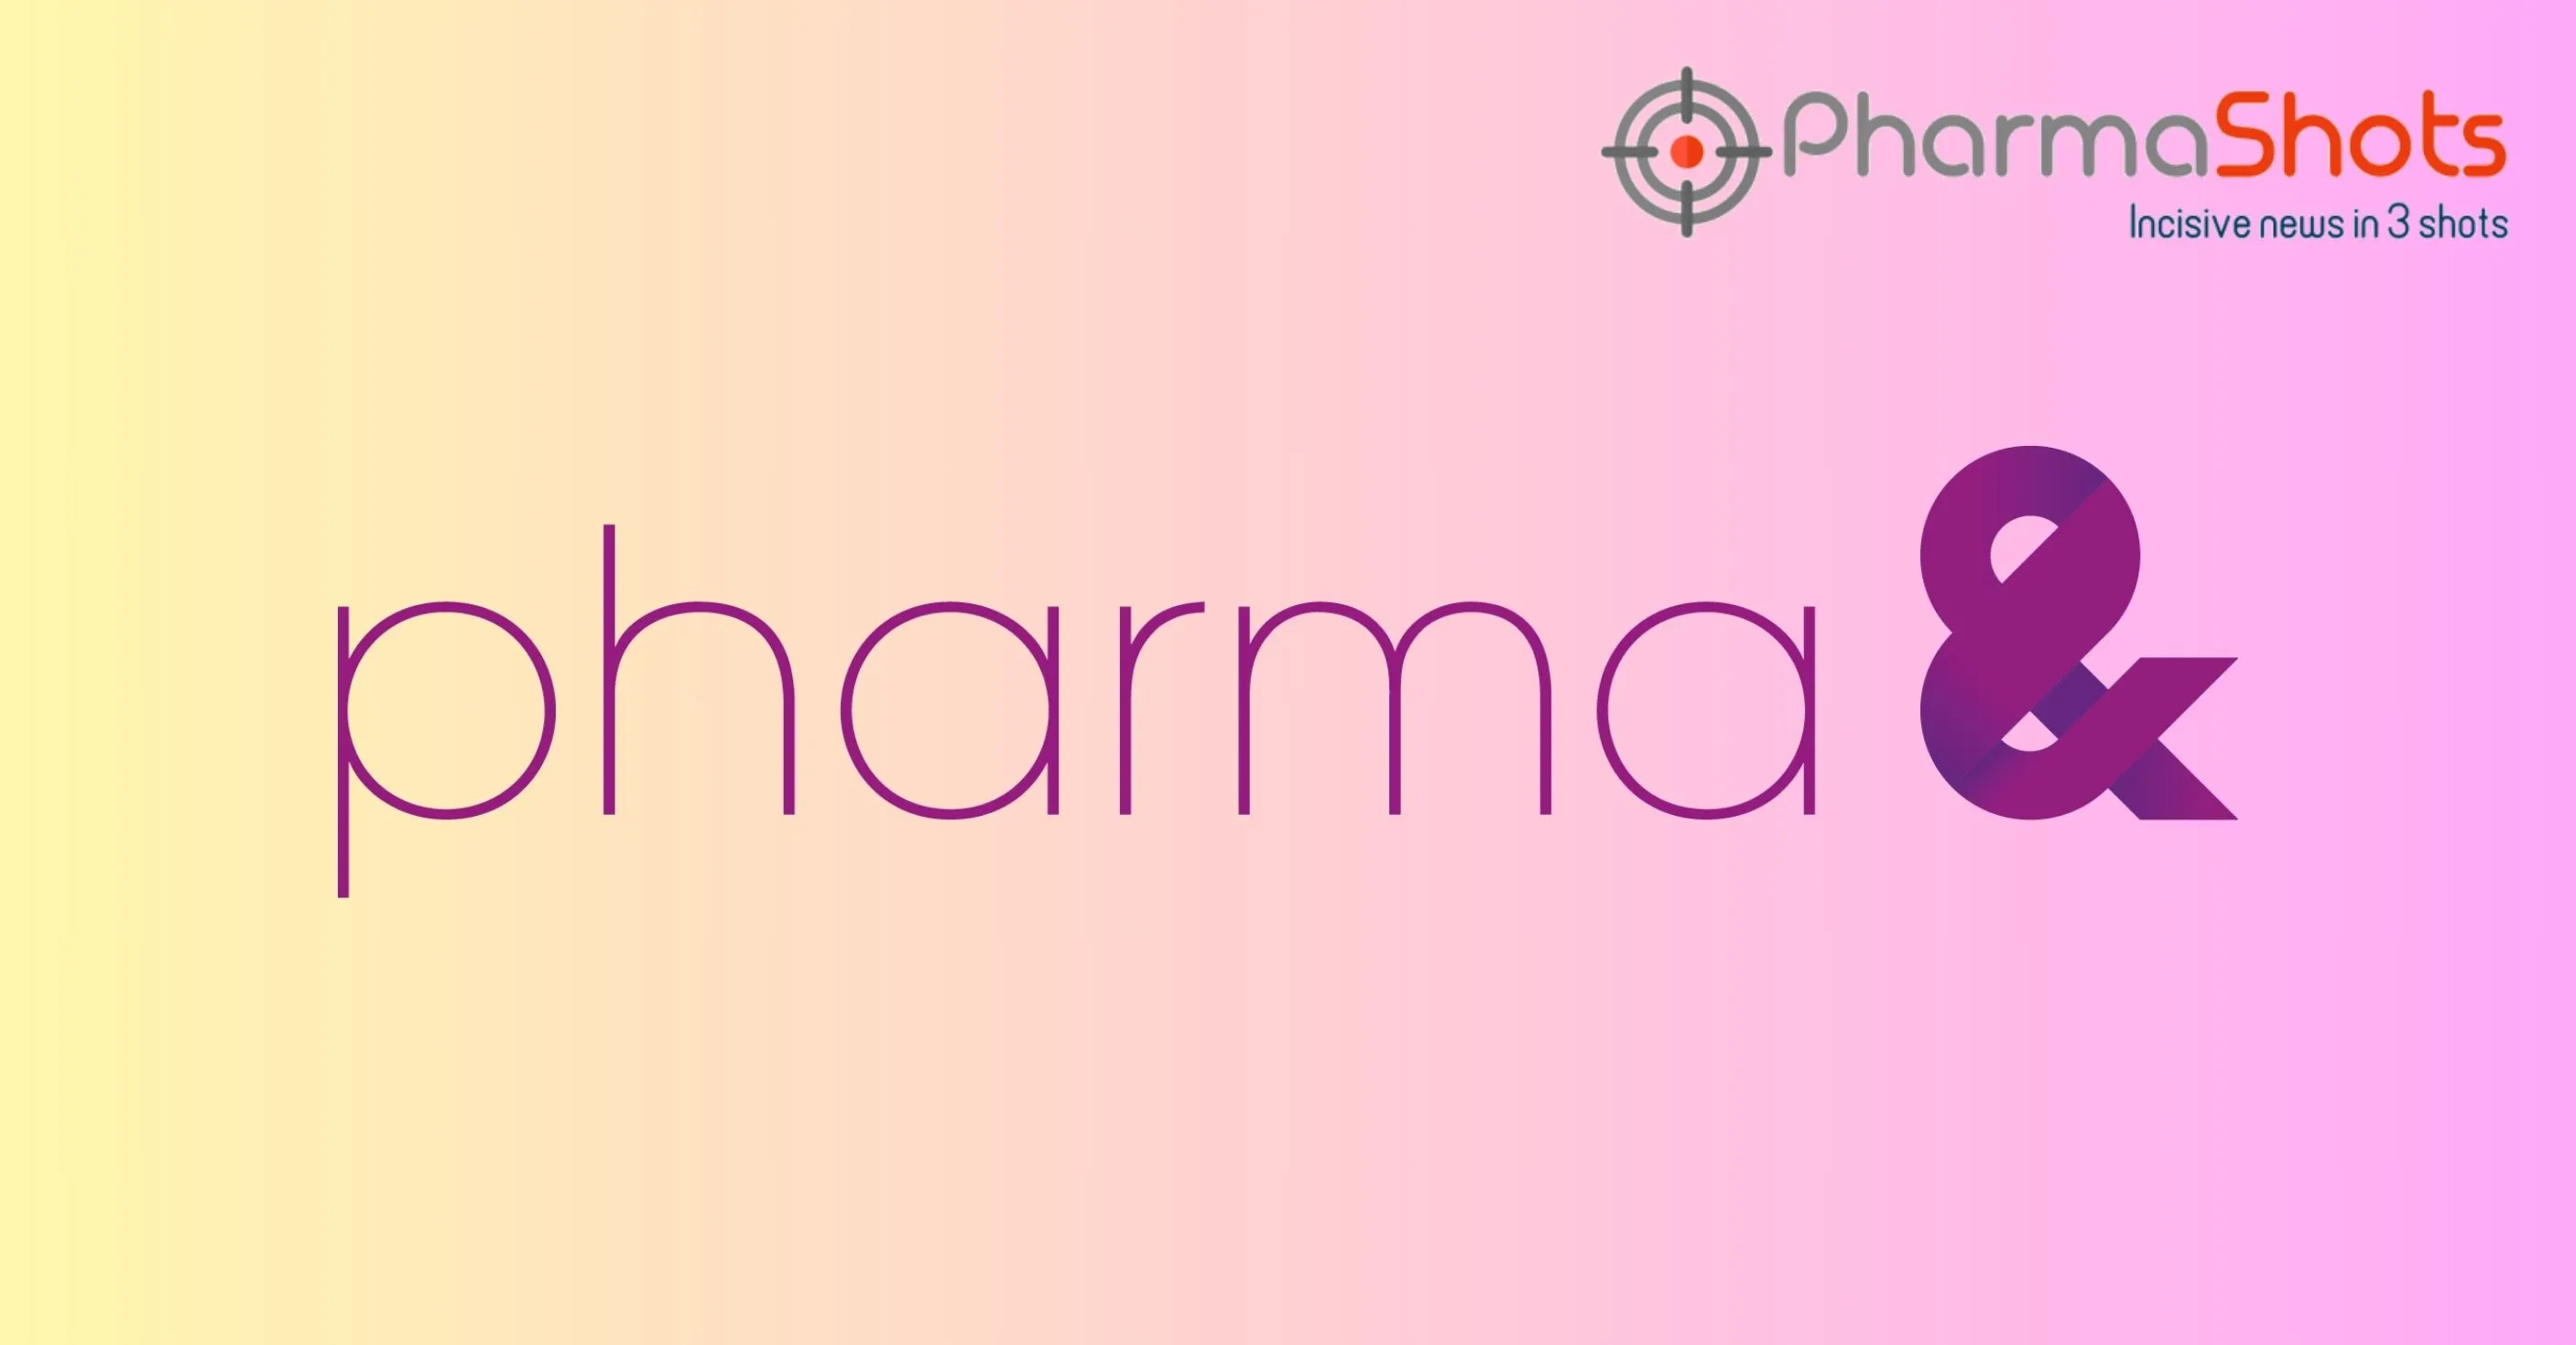 Pharmaand’s Rubraca Received EU’s CHMP Positive Opinion for the treatment of Ovarian Cancer